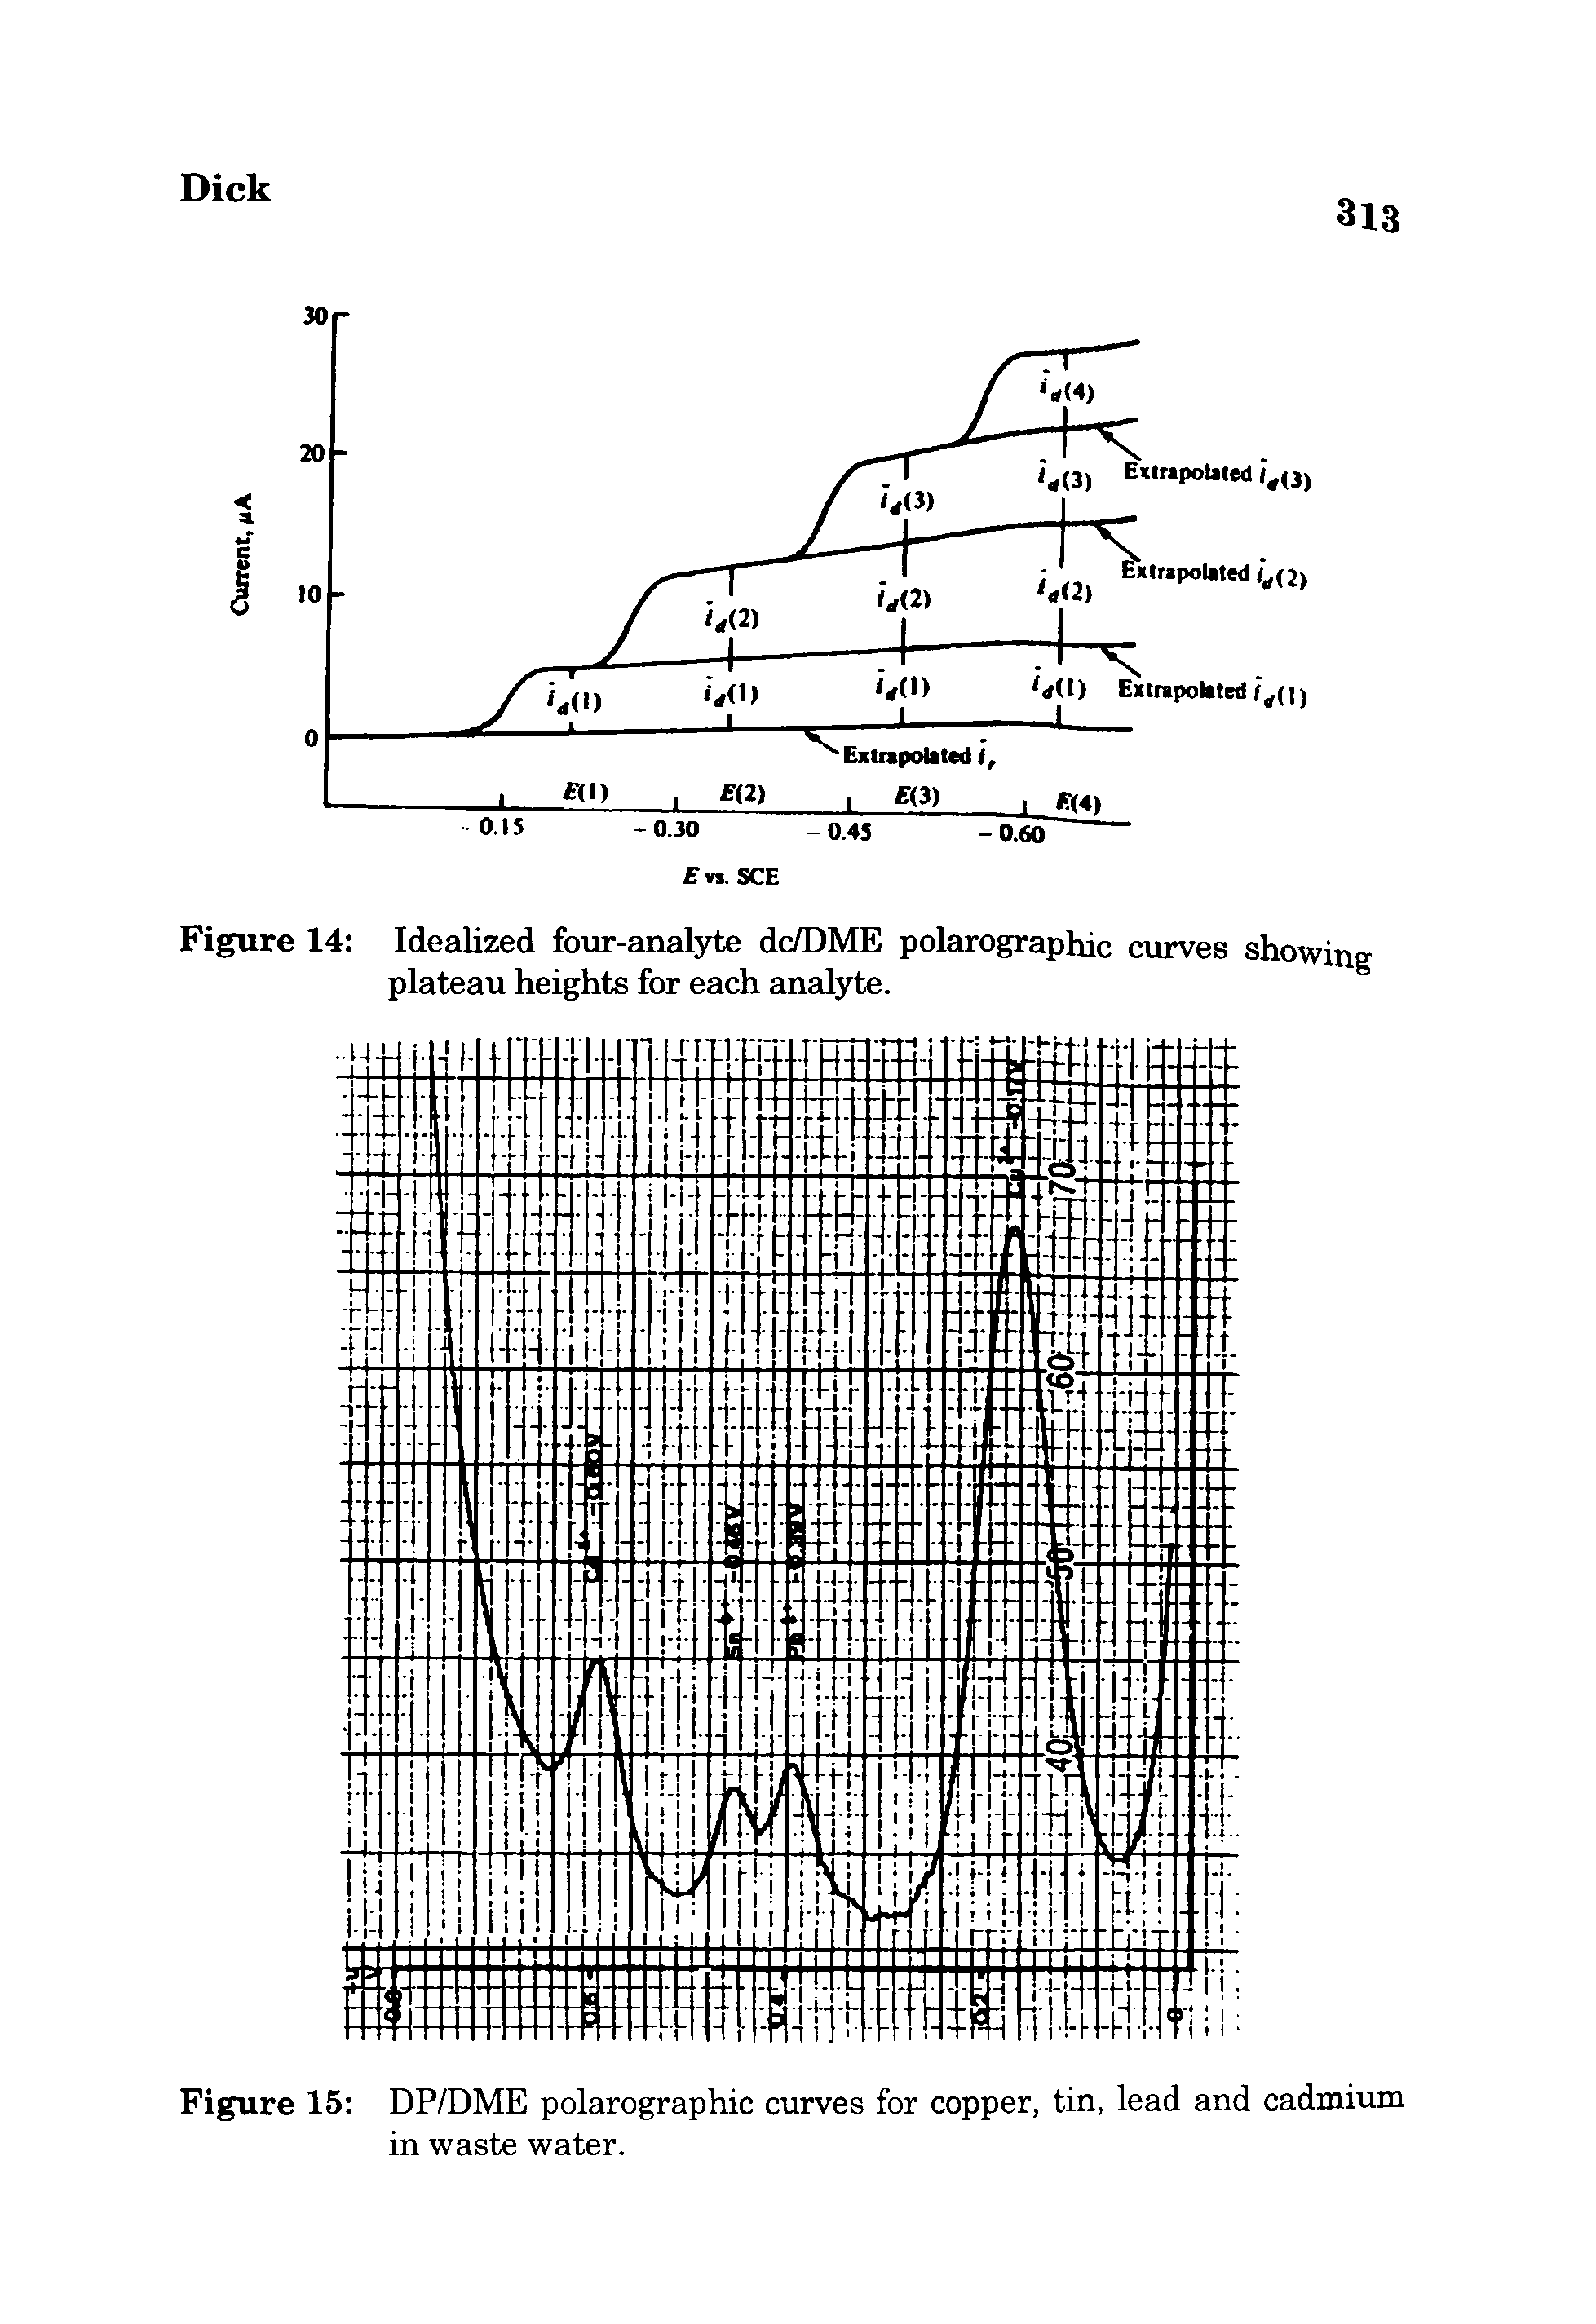 Figure 15 DP/DME polarographic curves for copper, tin, lead and cadmium in waste water.